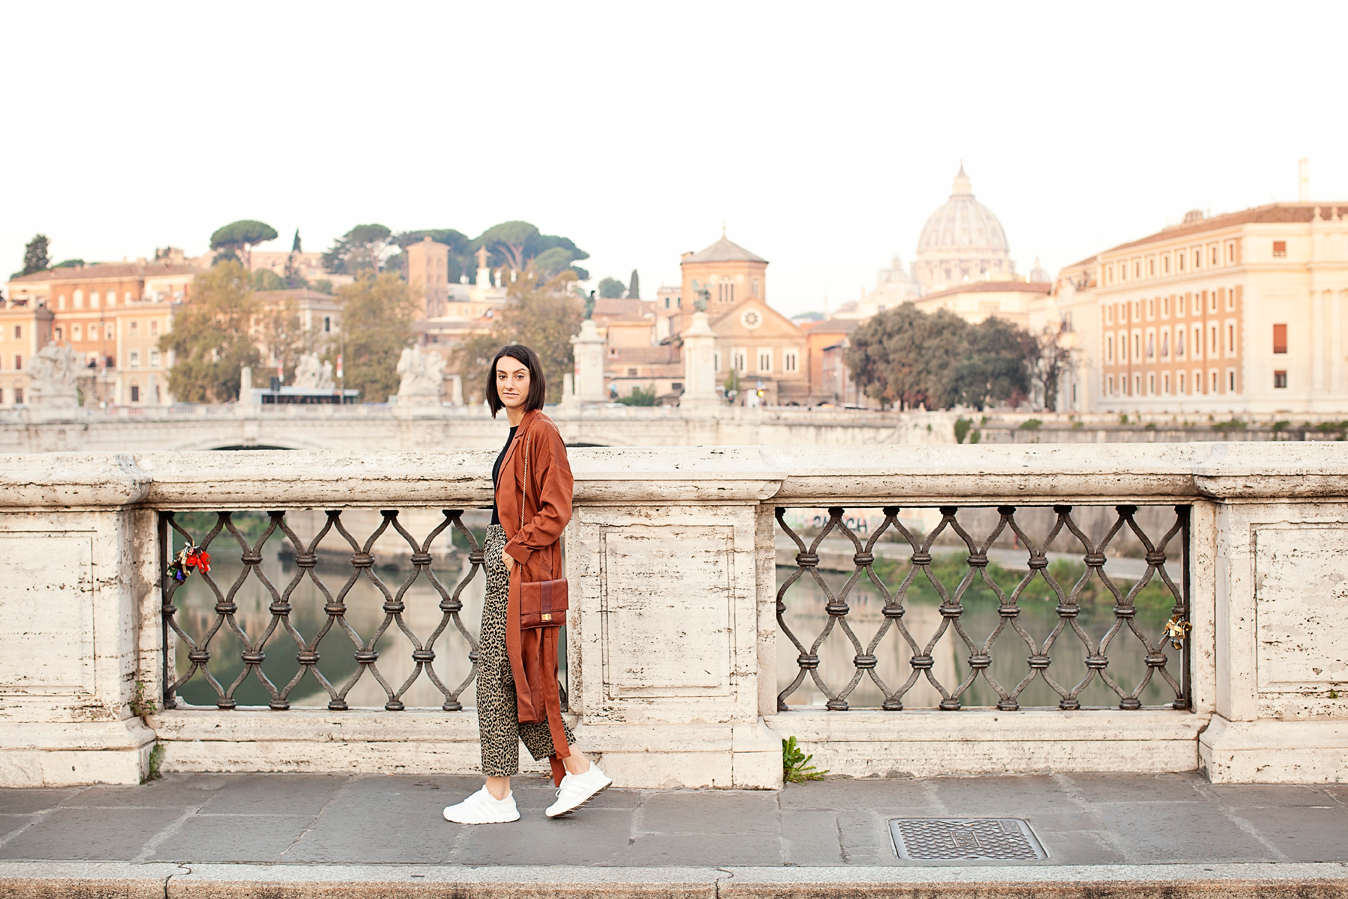 Honeymoon, vacation, family, engagement, maternity, wedding, love story individual and solo photoshoots in Rome, Italy by photographer Tricia Anne Photography | Rome Photographer, vacation, tripadvisor, instagram, fun, married, bride, groom, love, story, photography, session, photoshoot, wedding photographer, mywed, vacation photographer, engagement photo, honeymoon photoshoot, rome honeymoon, rome wedding, elopement in Rome, honeymoon photographer rome, Family Photo shoot Rome, Rome Engagement Photography, Rome Engagement Photographer, Solo Photo shoot, Rome Photography, surprise proposal rome, Solo trip to Rome, What to do in Rome, Solo traveler, Castle Sant’Angelo, Piazza Navona photo shoot